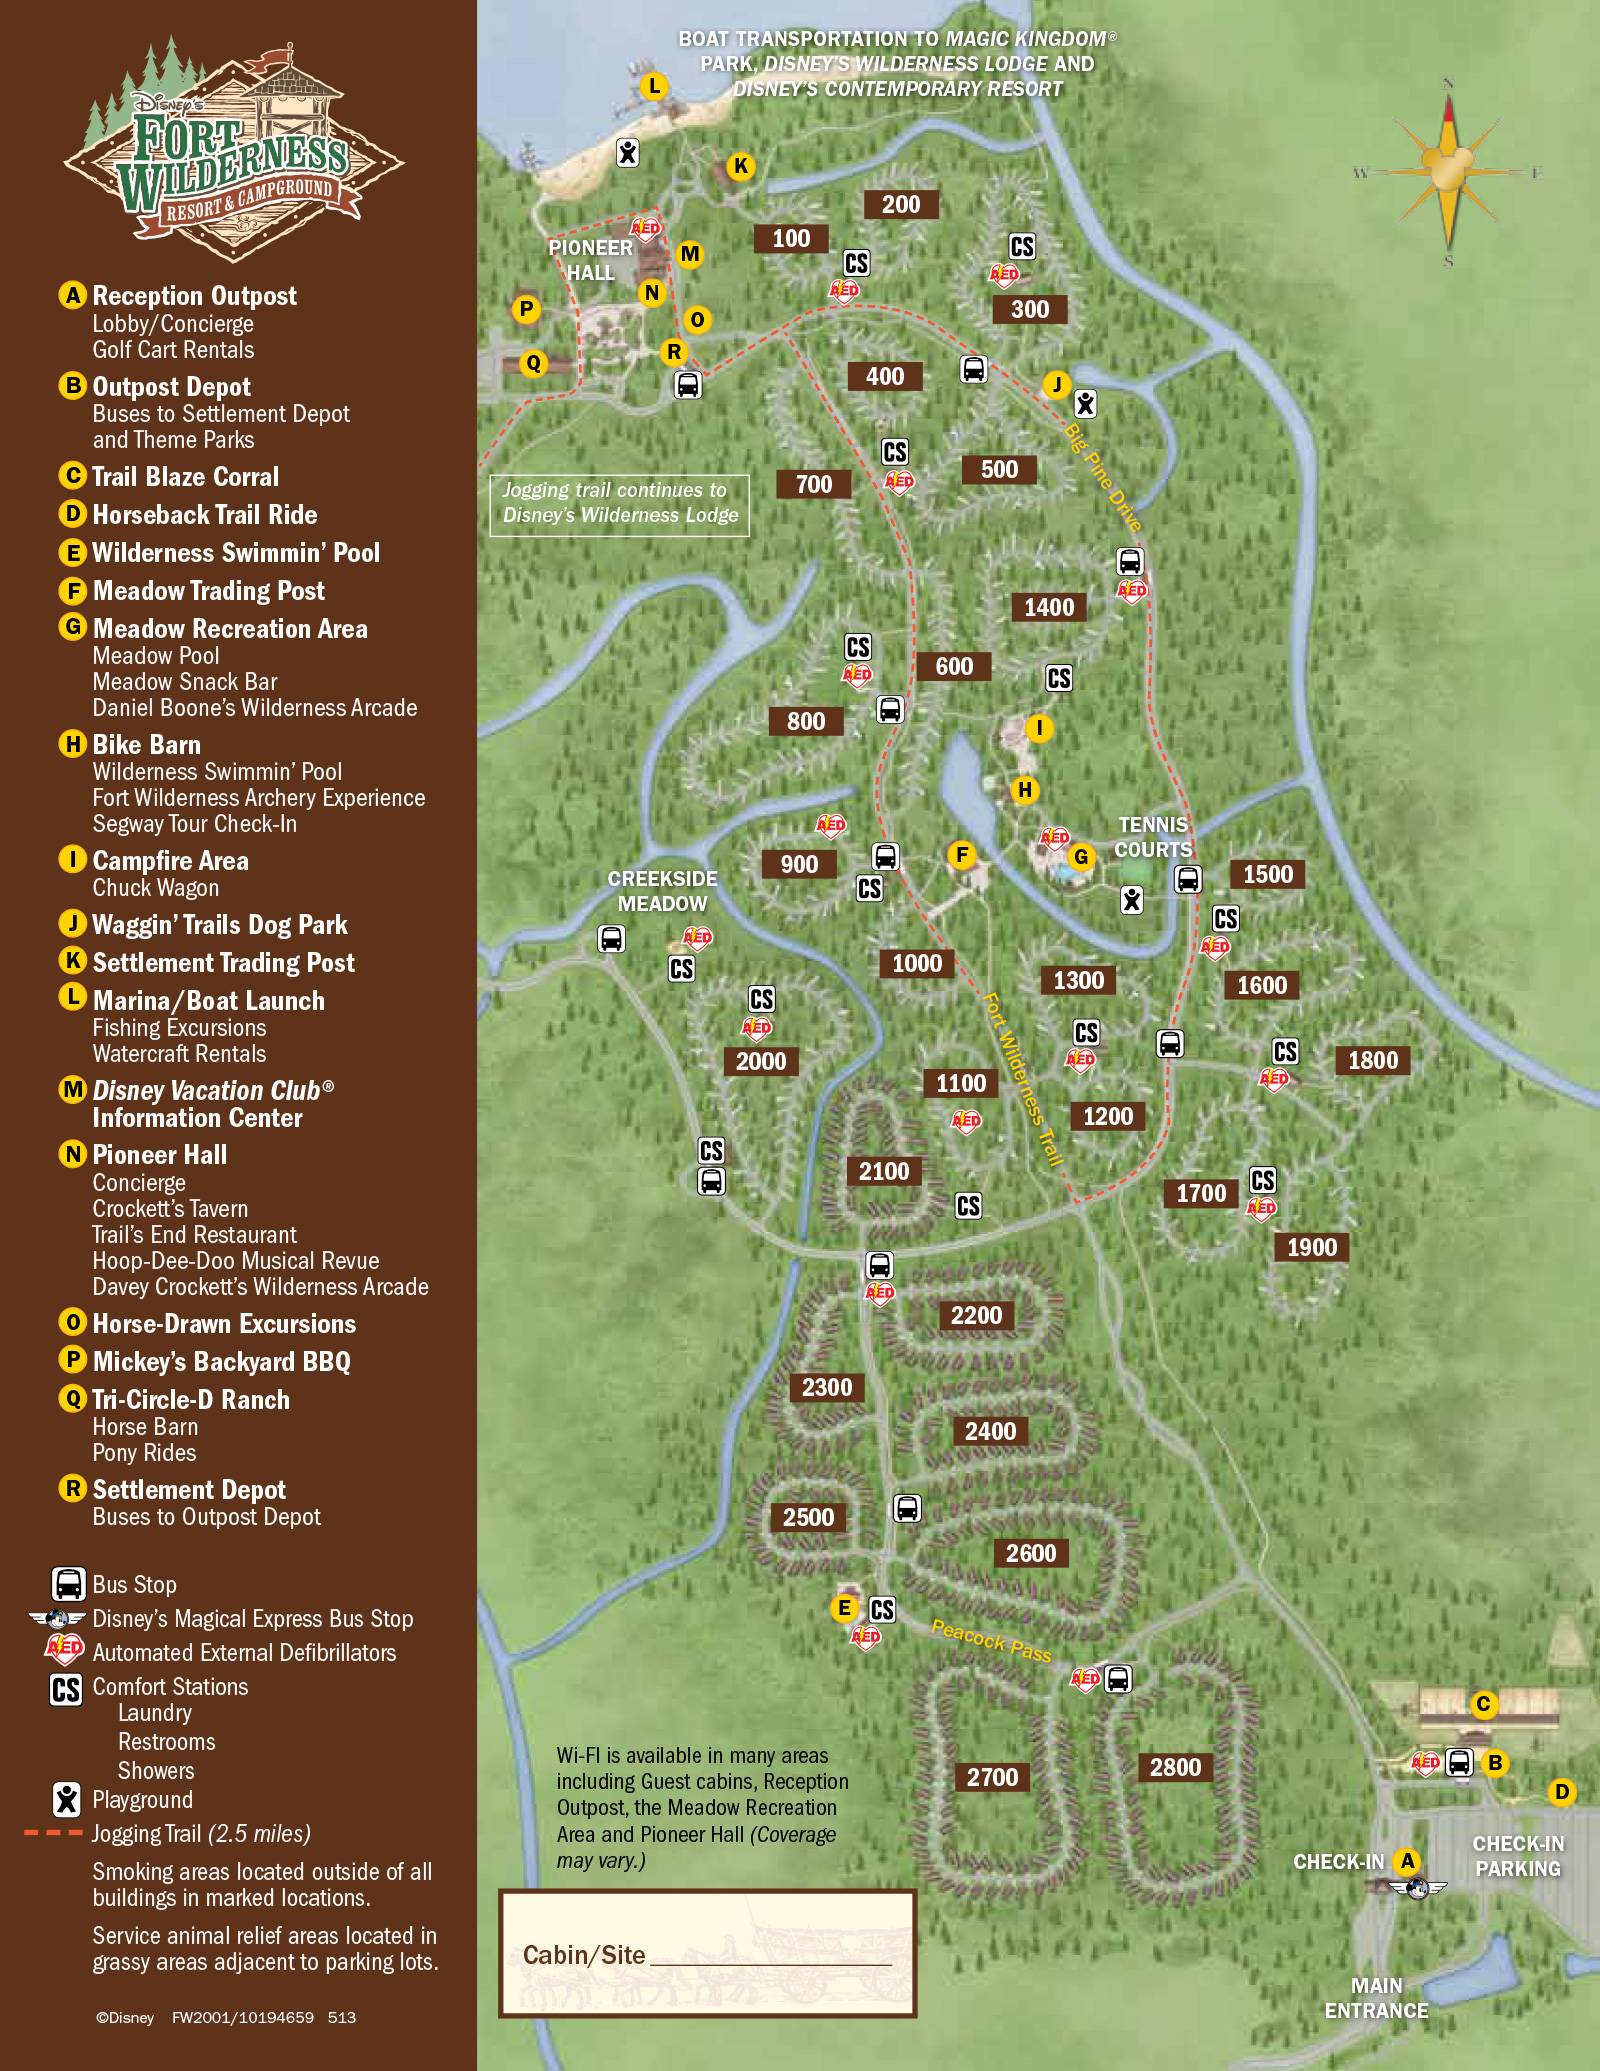 New 2013 Fort Wilderness map